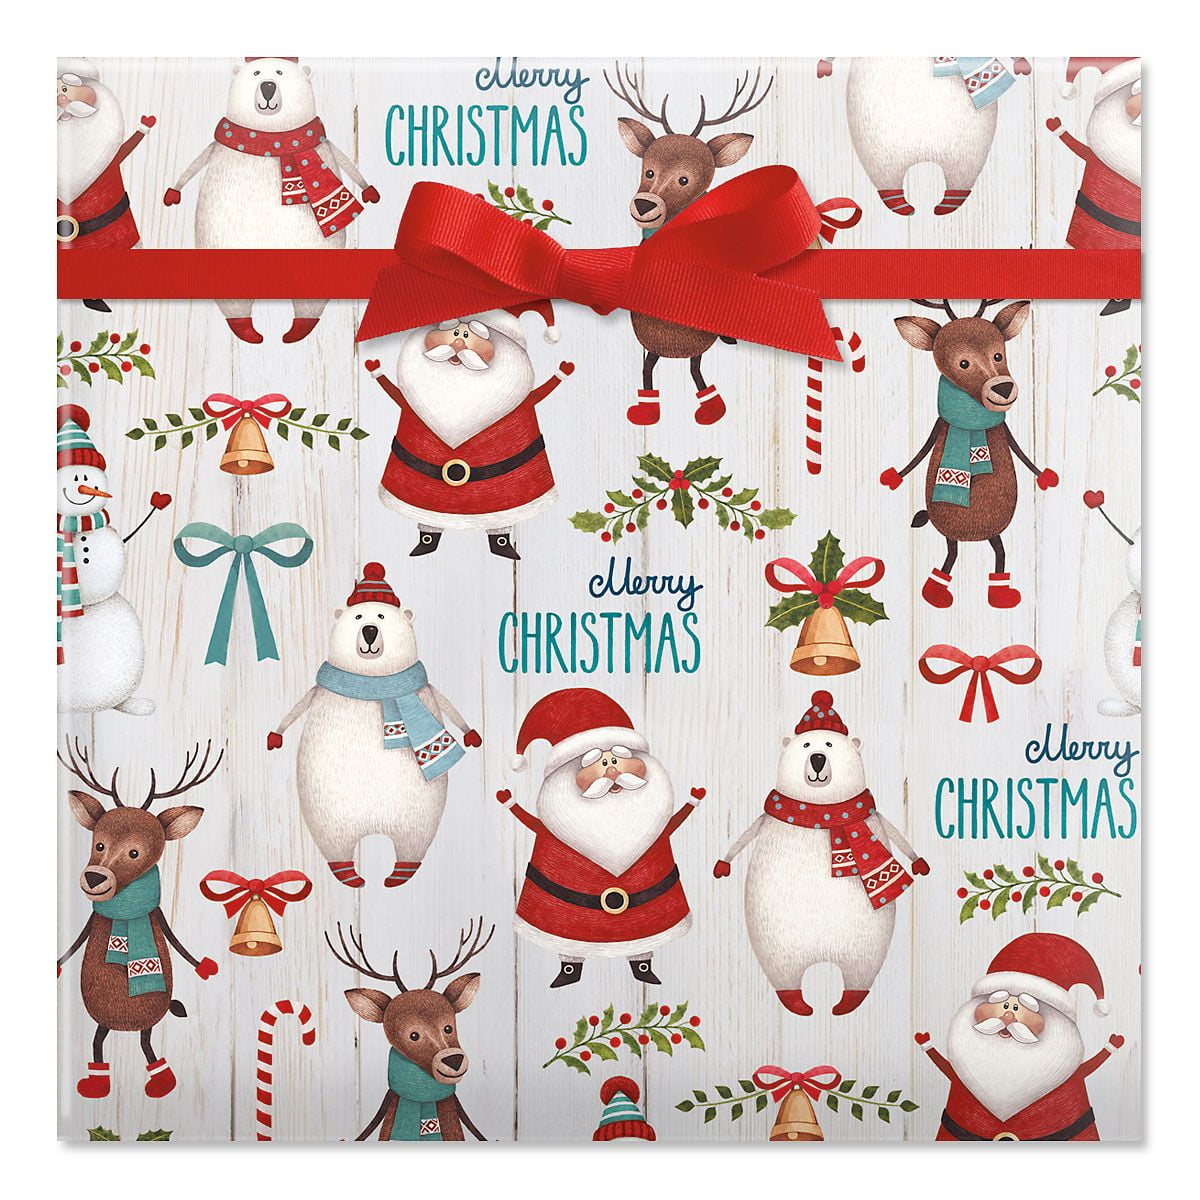 Super Mario Hallmark Christmas Gift Wrapping Paper Roll 20 Sq Ft. 